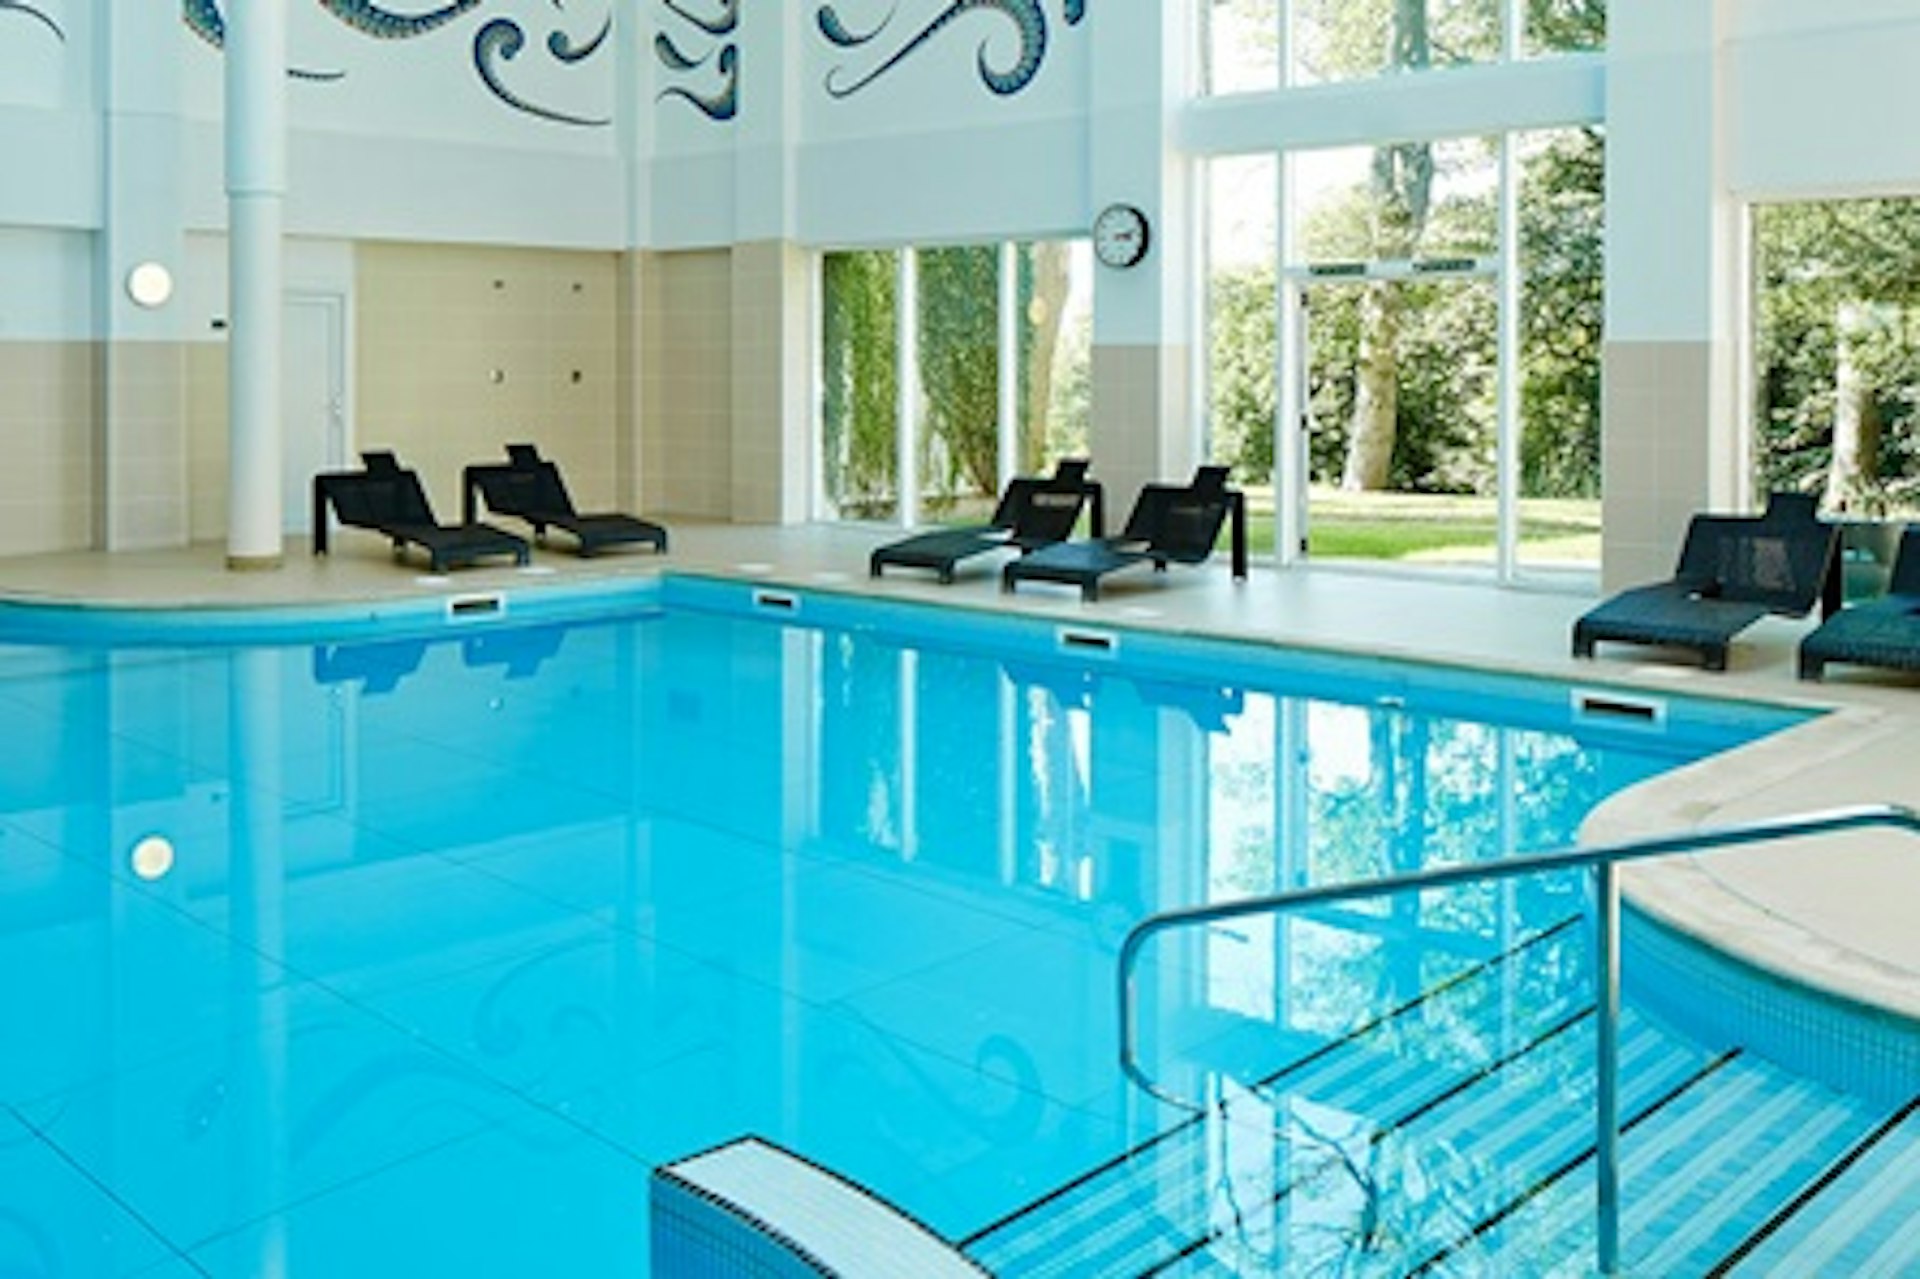 Winter One Night Scottish Break with Dinner for Two at the 4* Dalmahoy Hotel & Country Club, Edinburgh 4